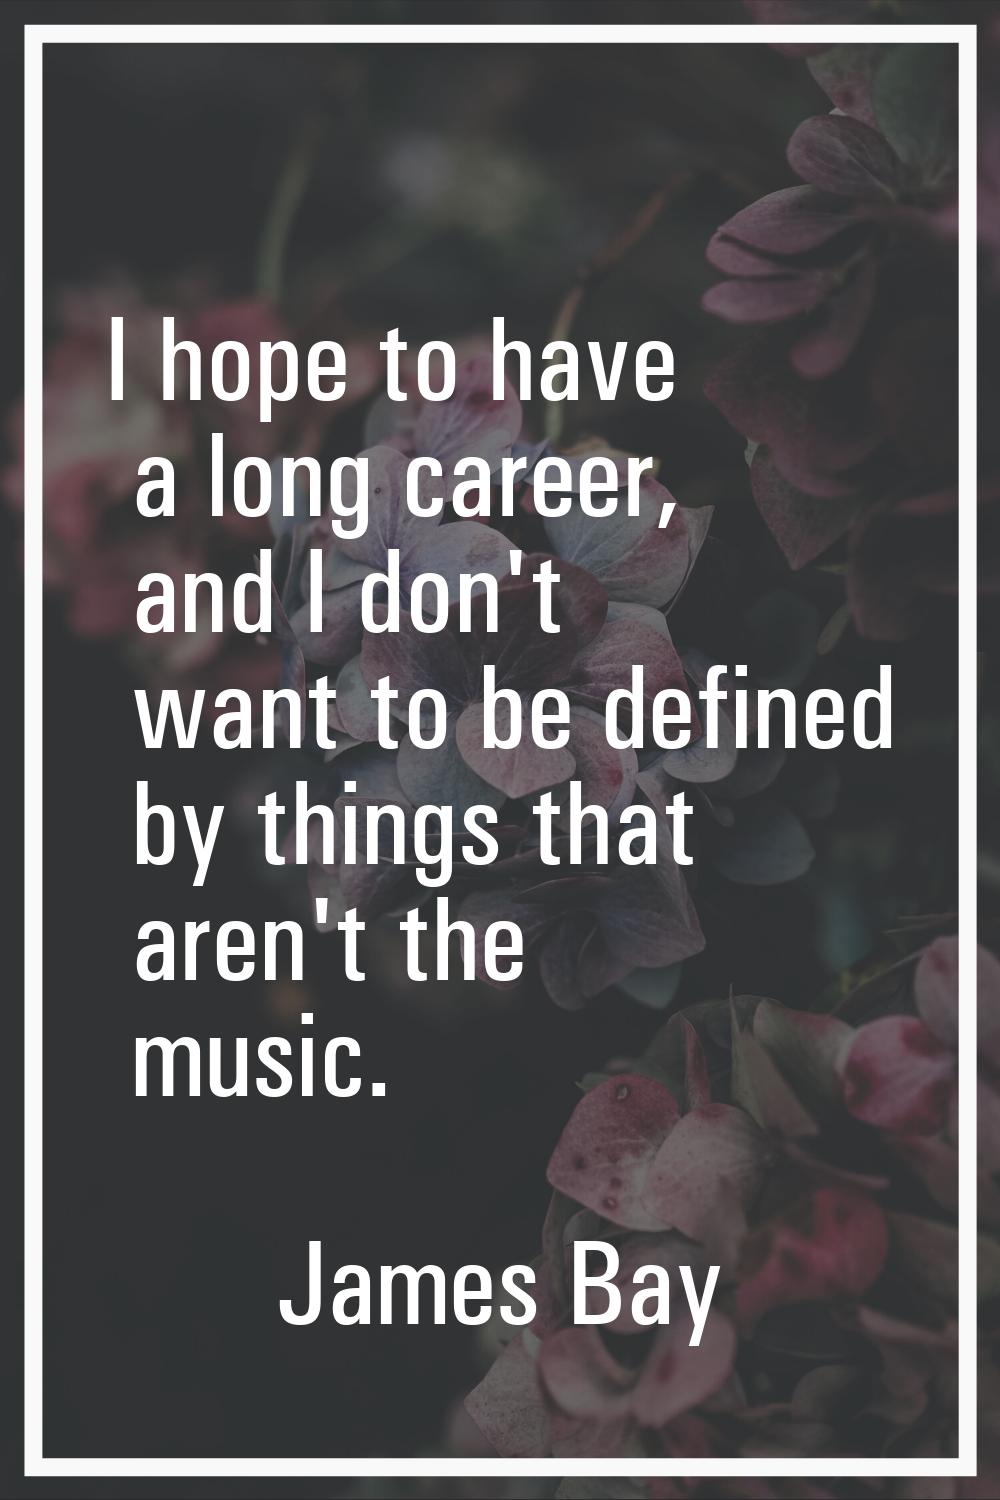 I hope to have a long career, and I don't want to be defined by things that aren't the music.